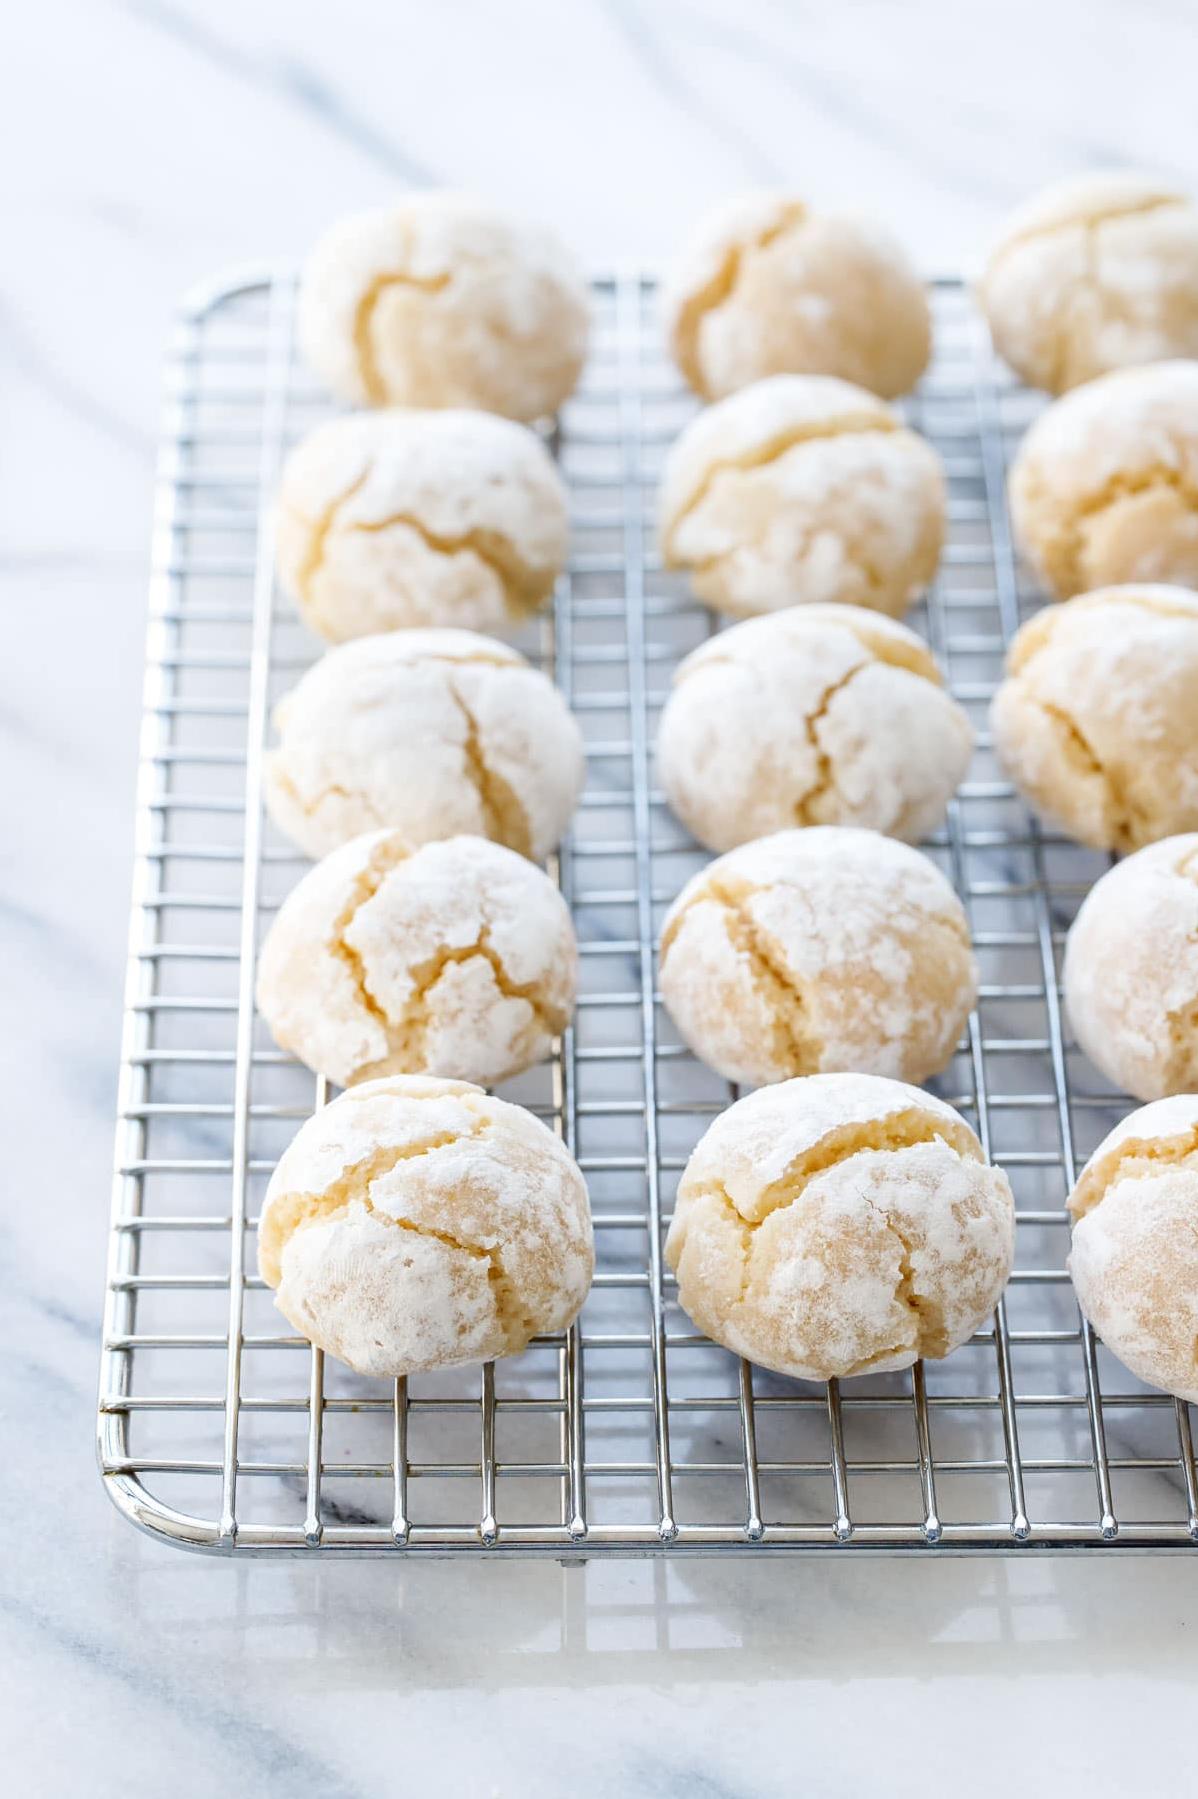  Deliciously chewy and nutty, these amaretti cookies won't let you down.